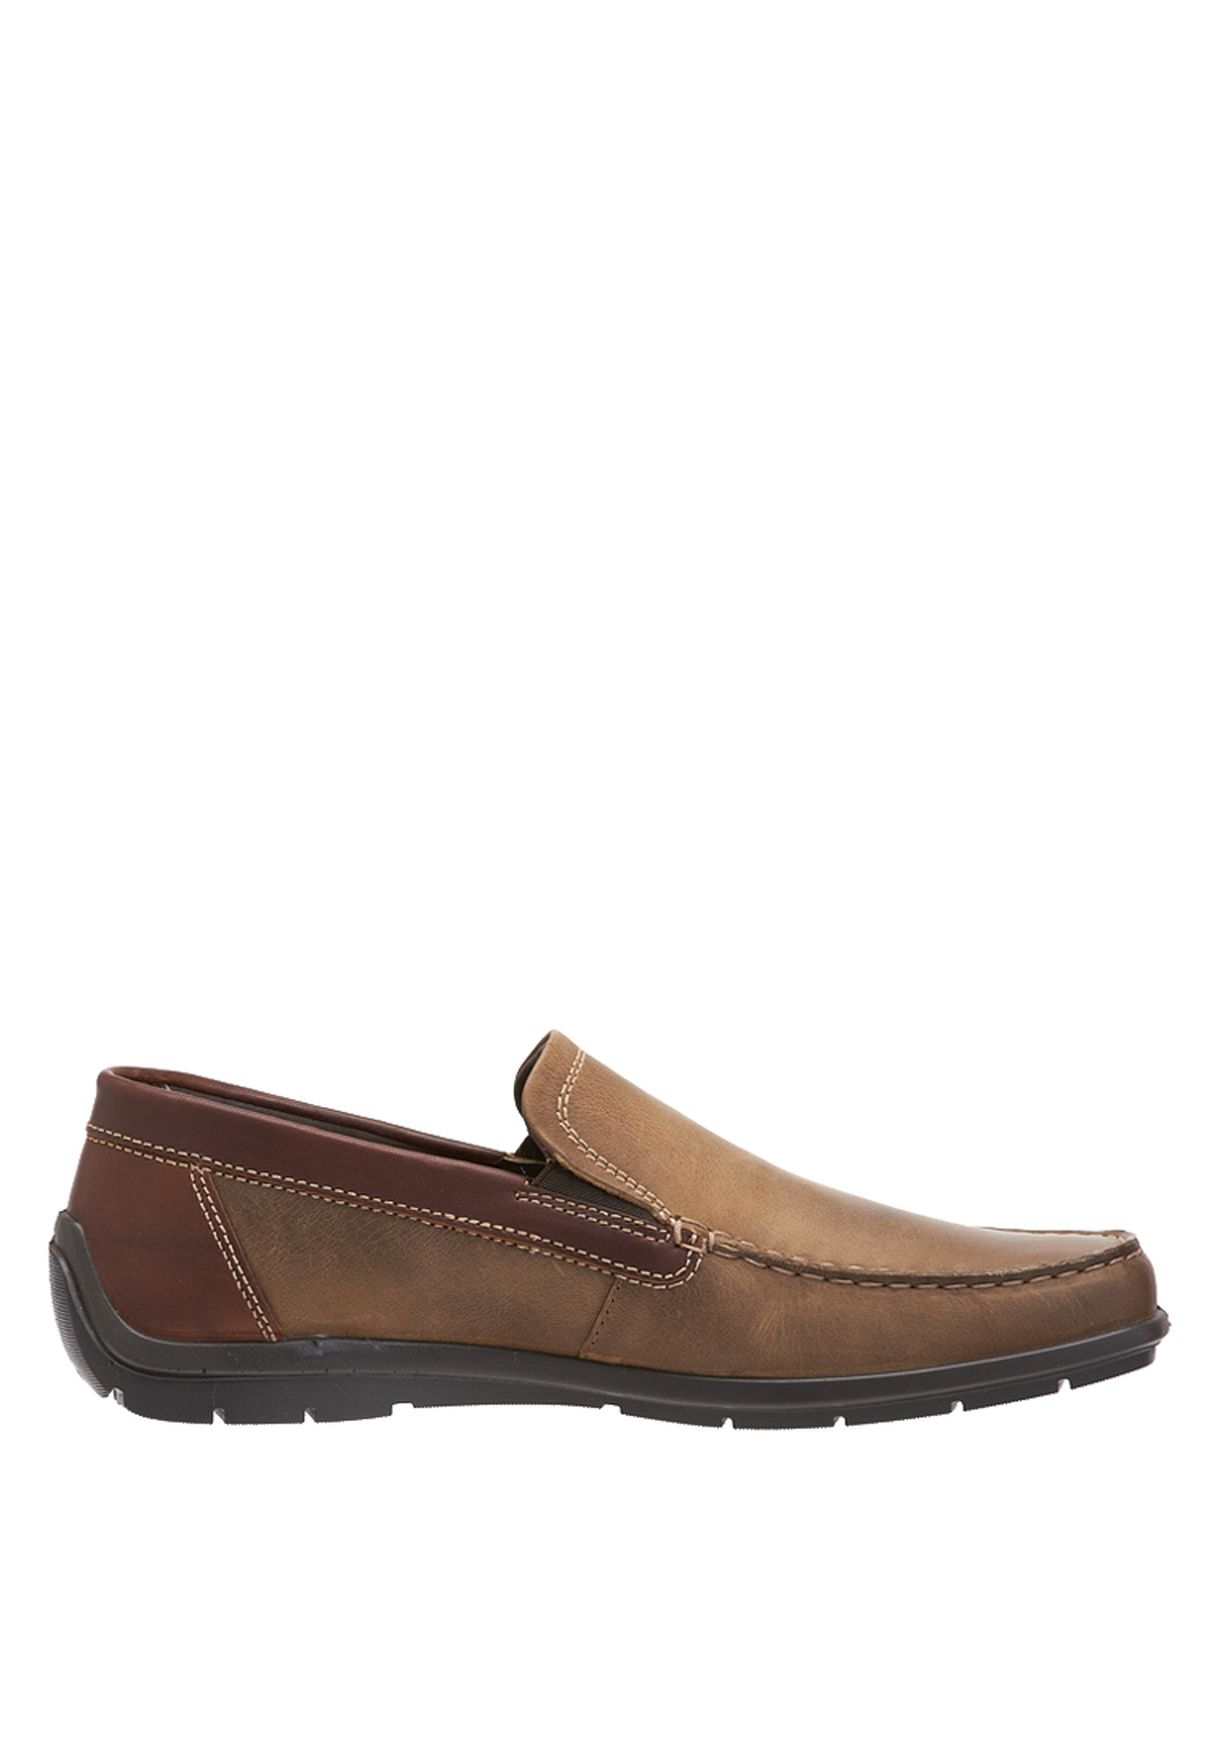 clarks shoes kuwait off 68% - online-sms.in